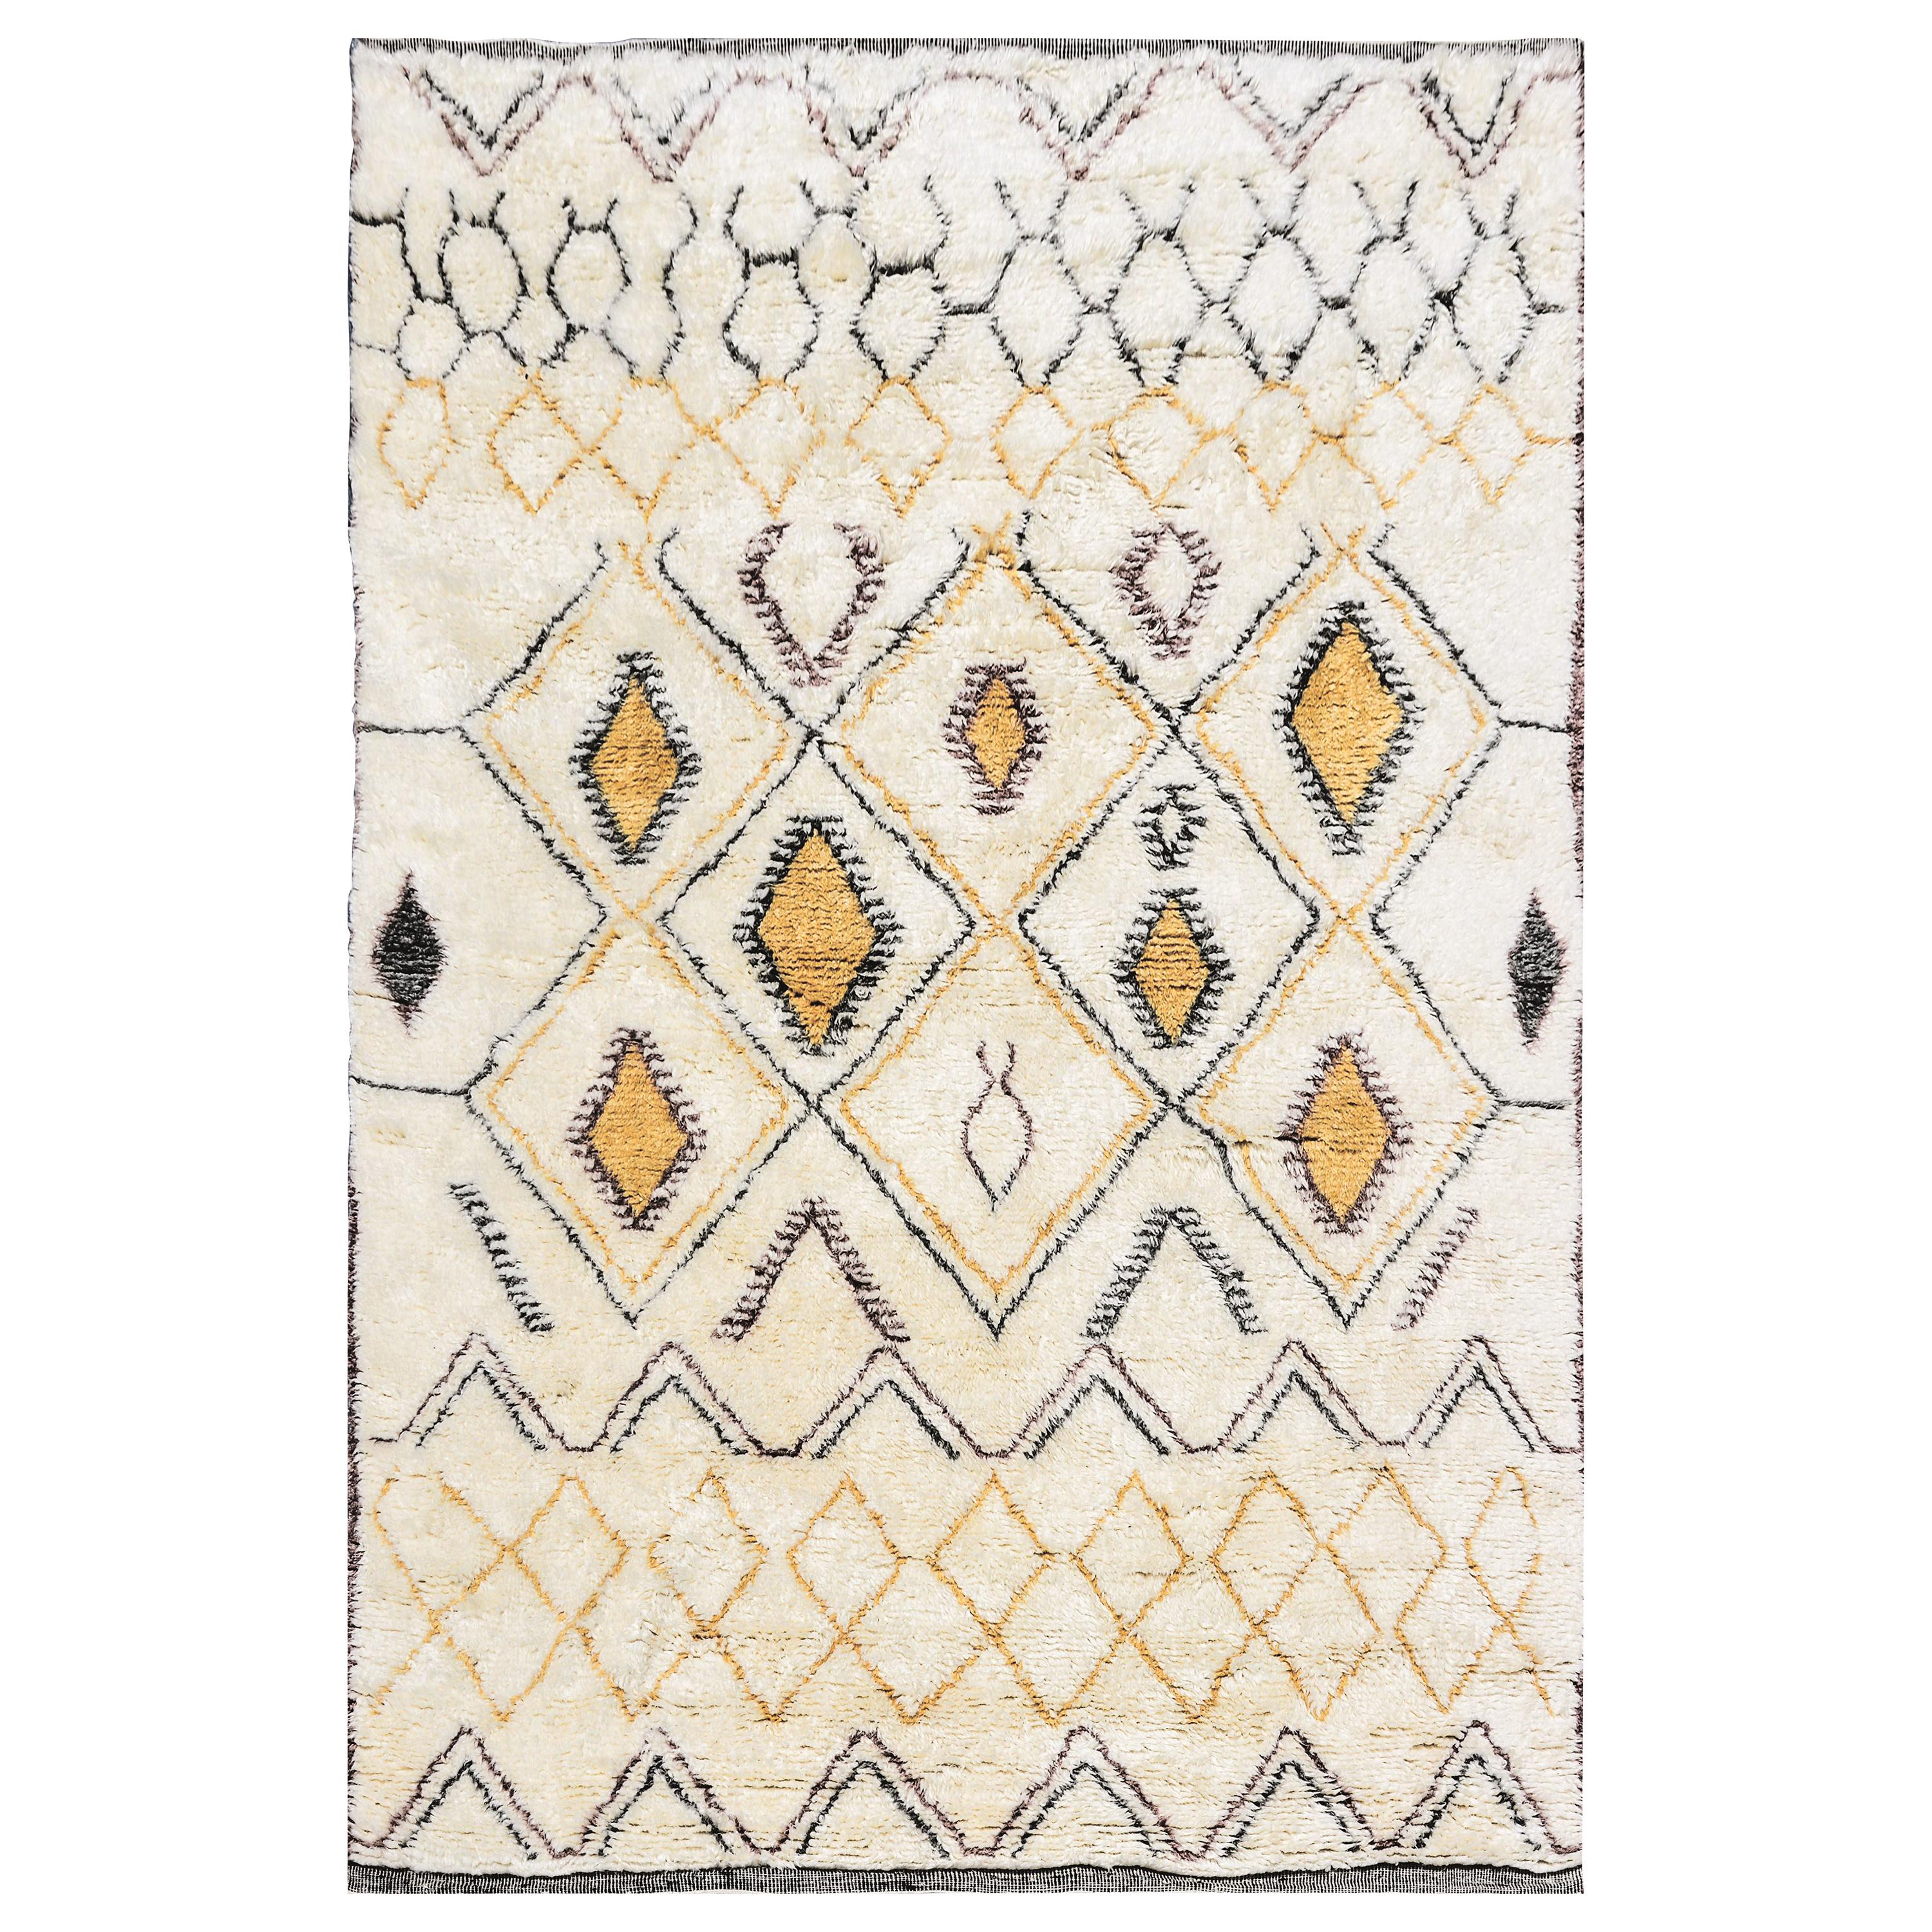 Contemporary Moroccan Ivory and Multi-Color Wool Rug with Tribal Pattern